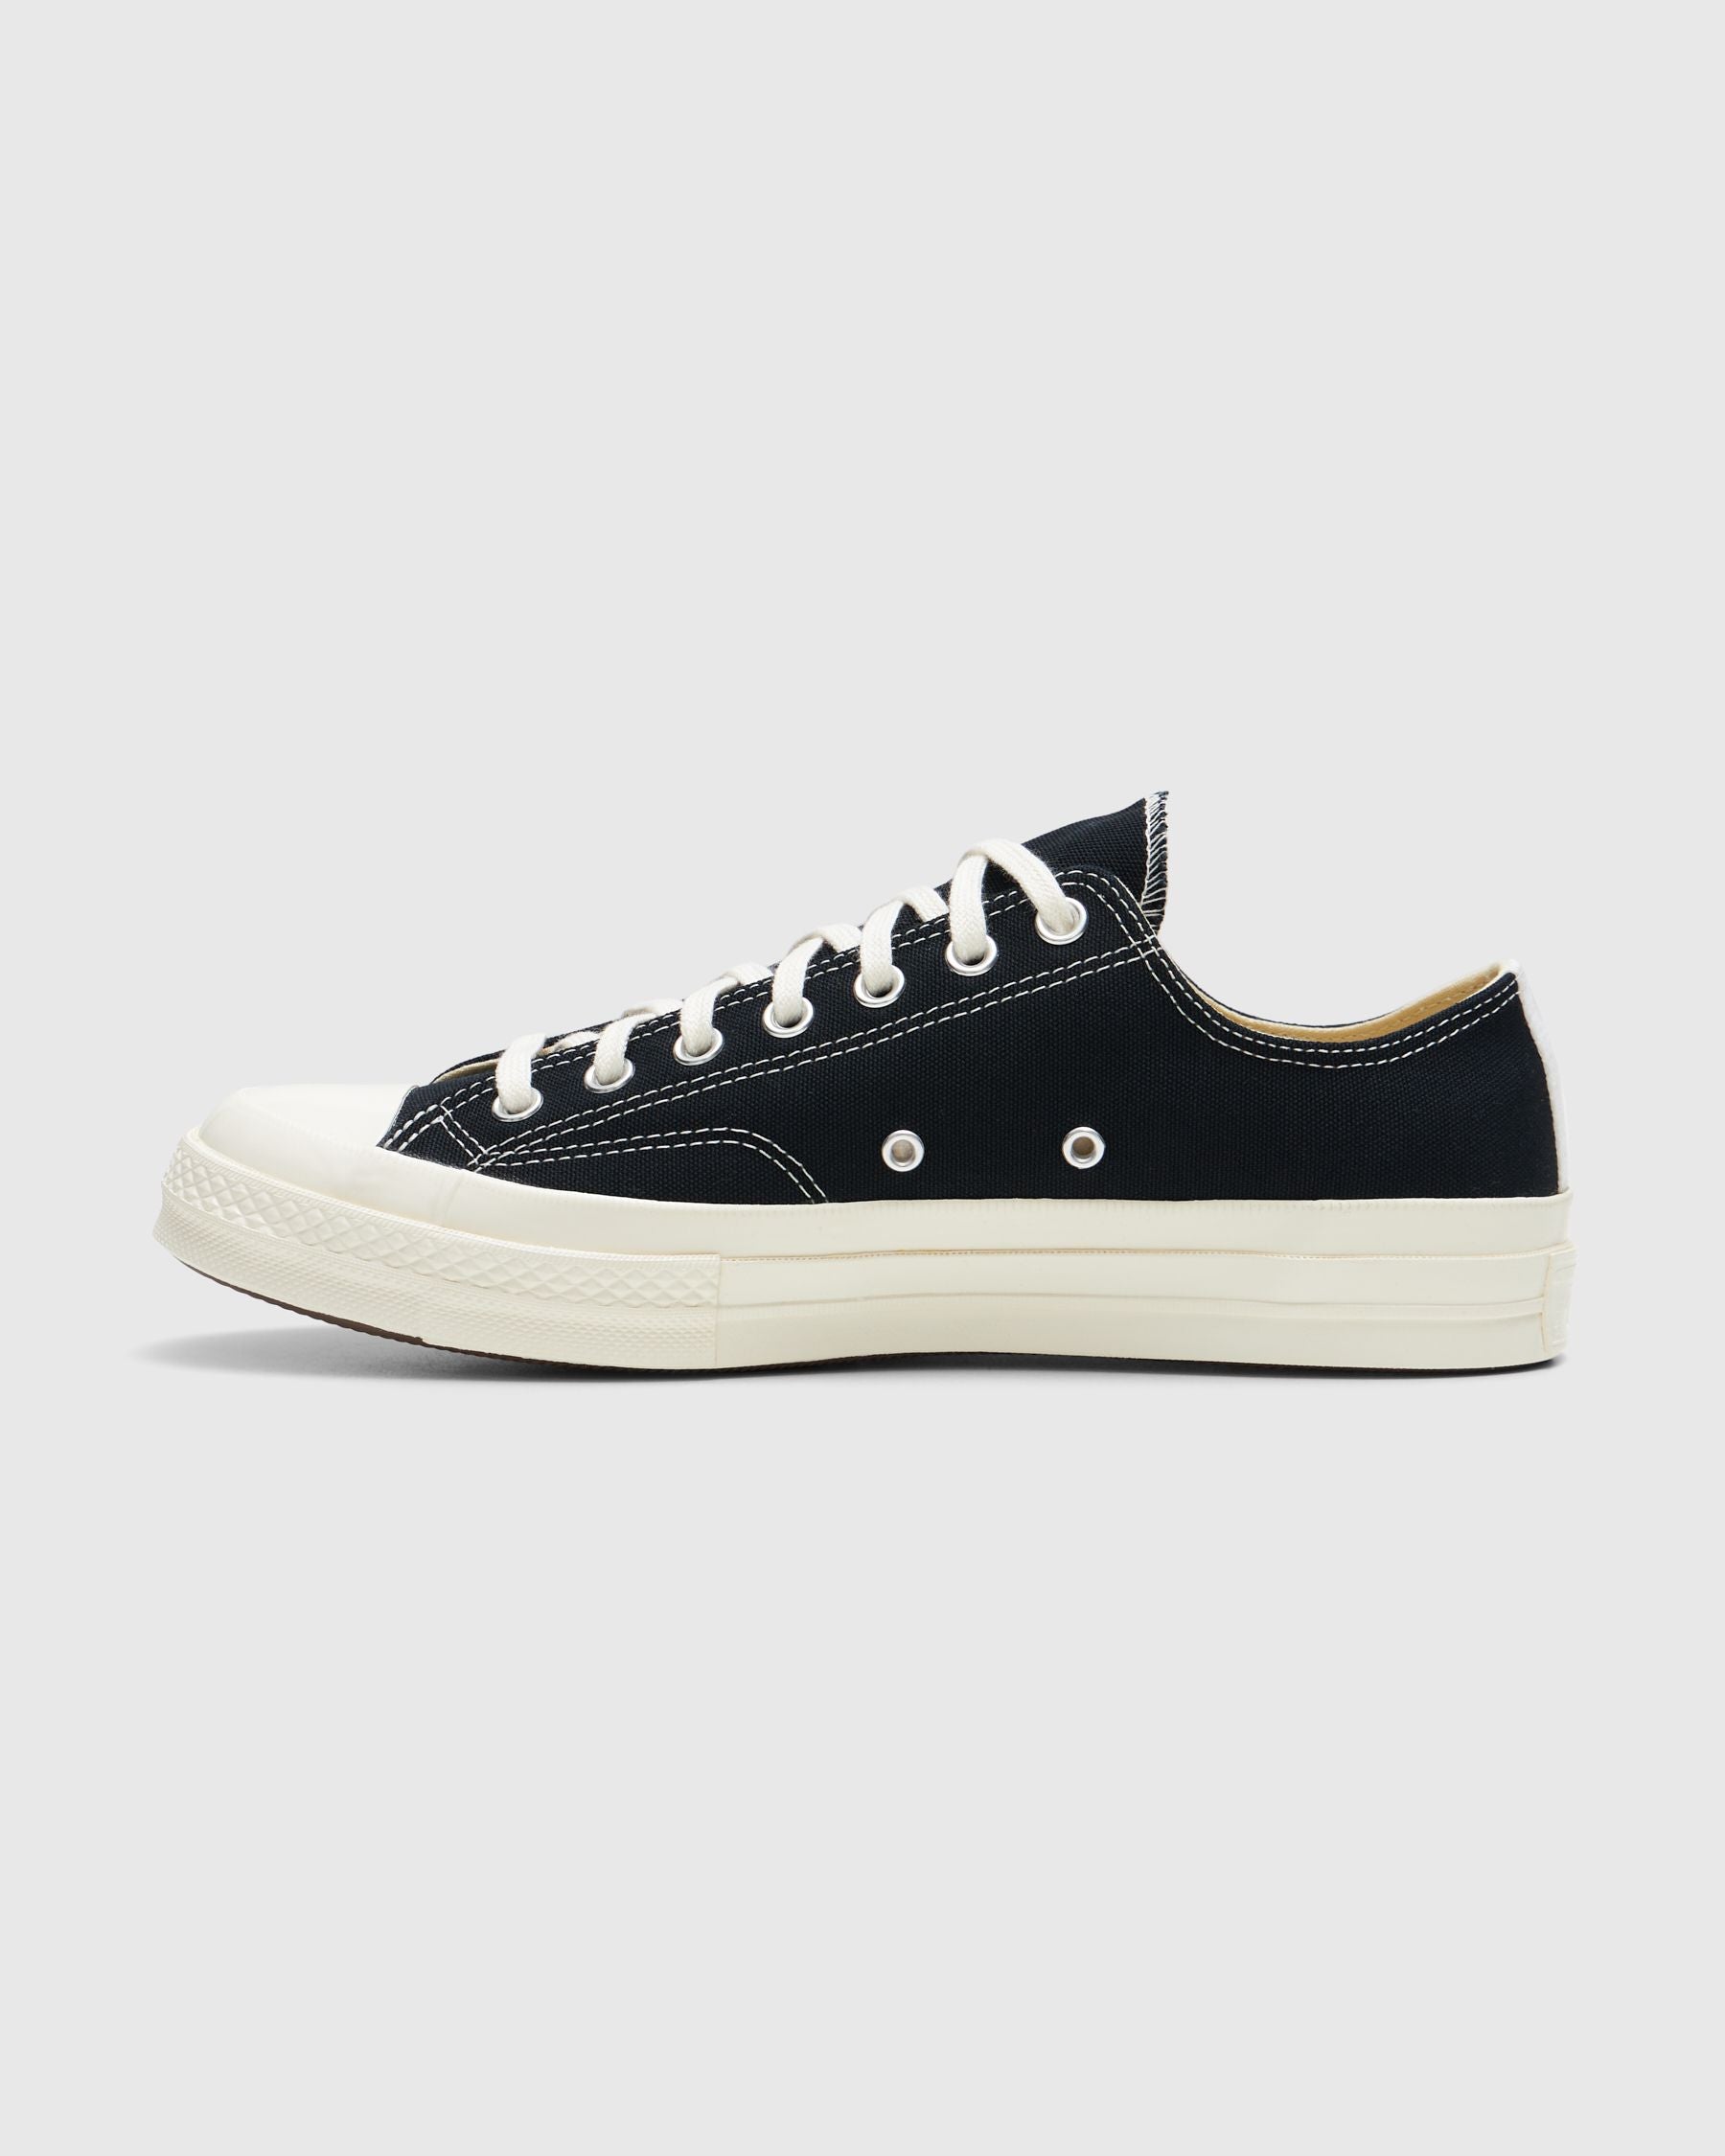 Red Heart Chuck Taylor All Star '70 Low in Black